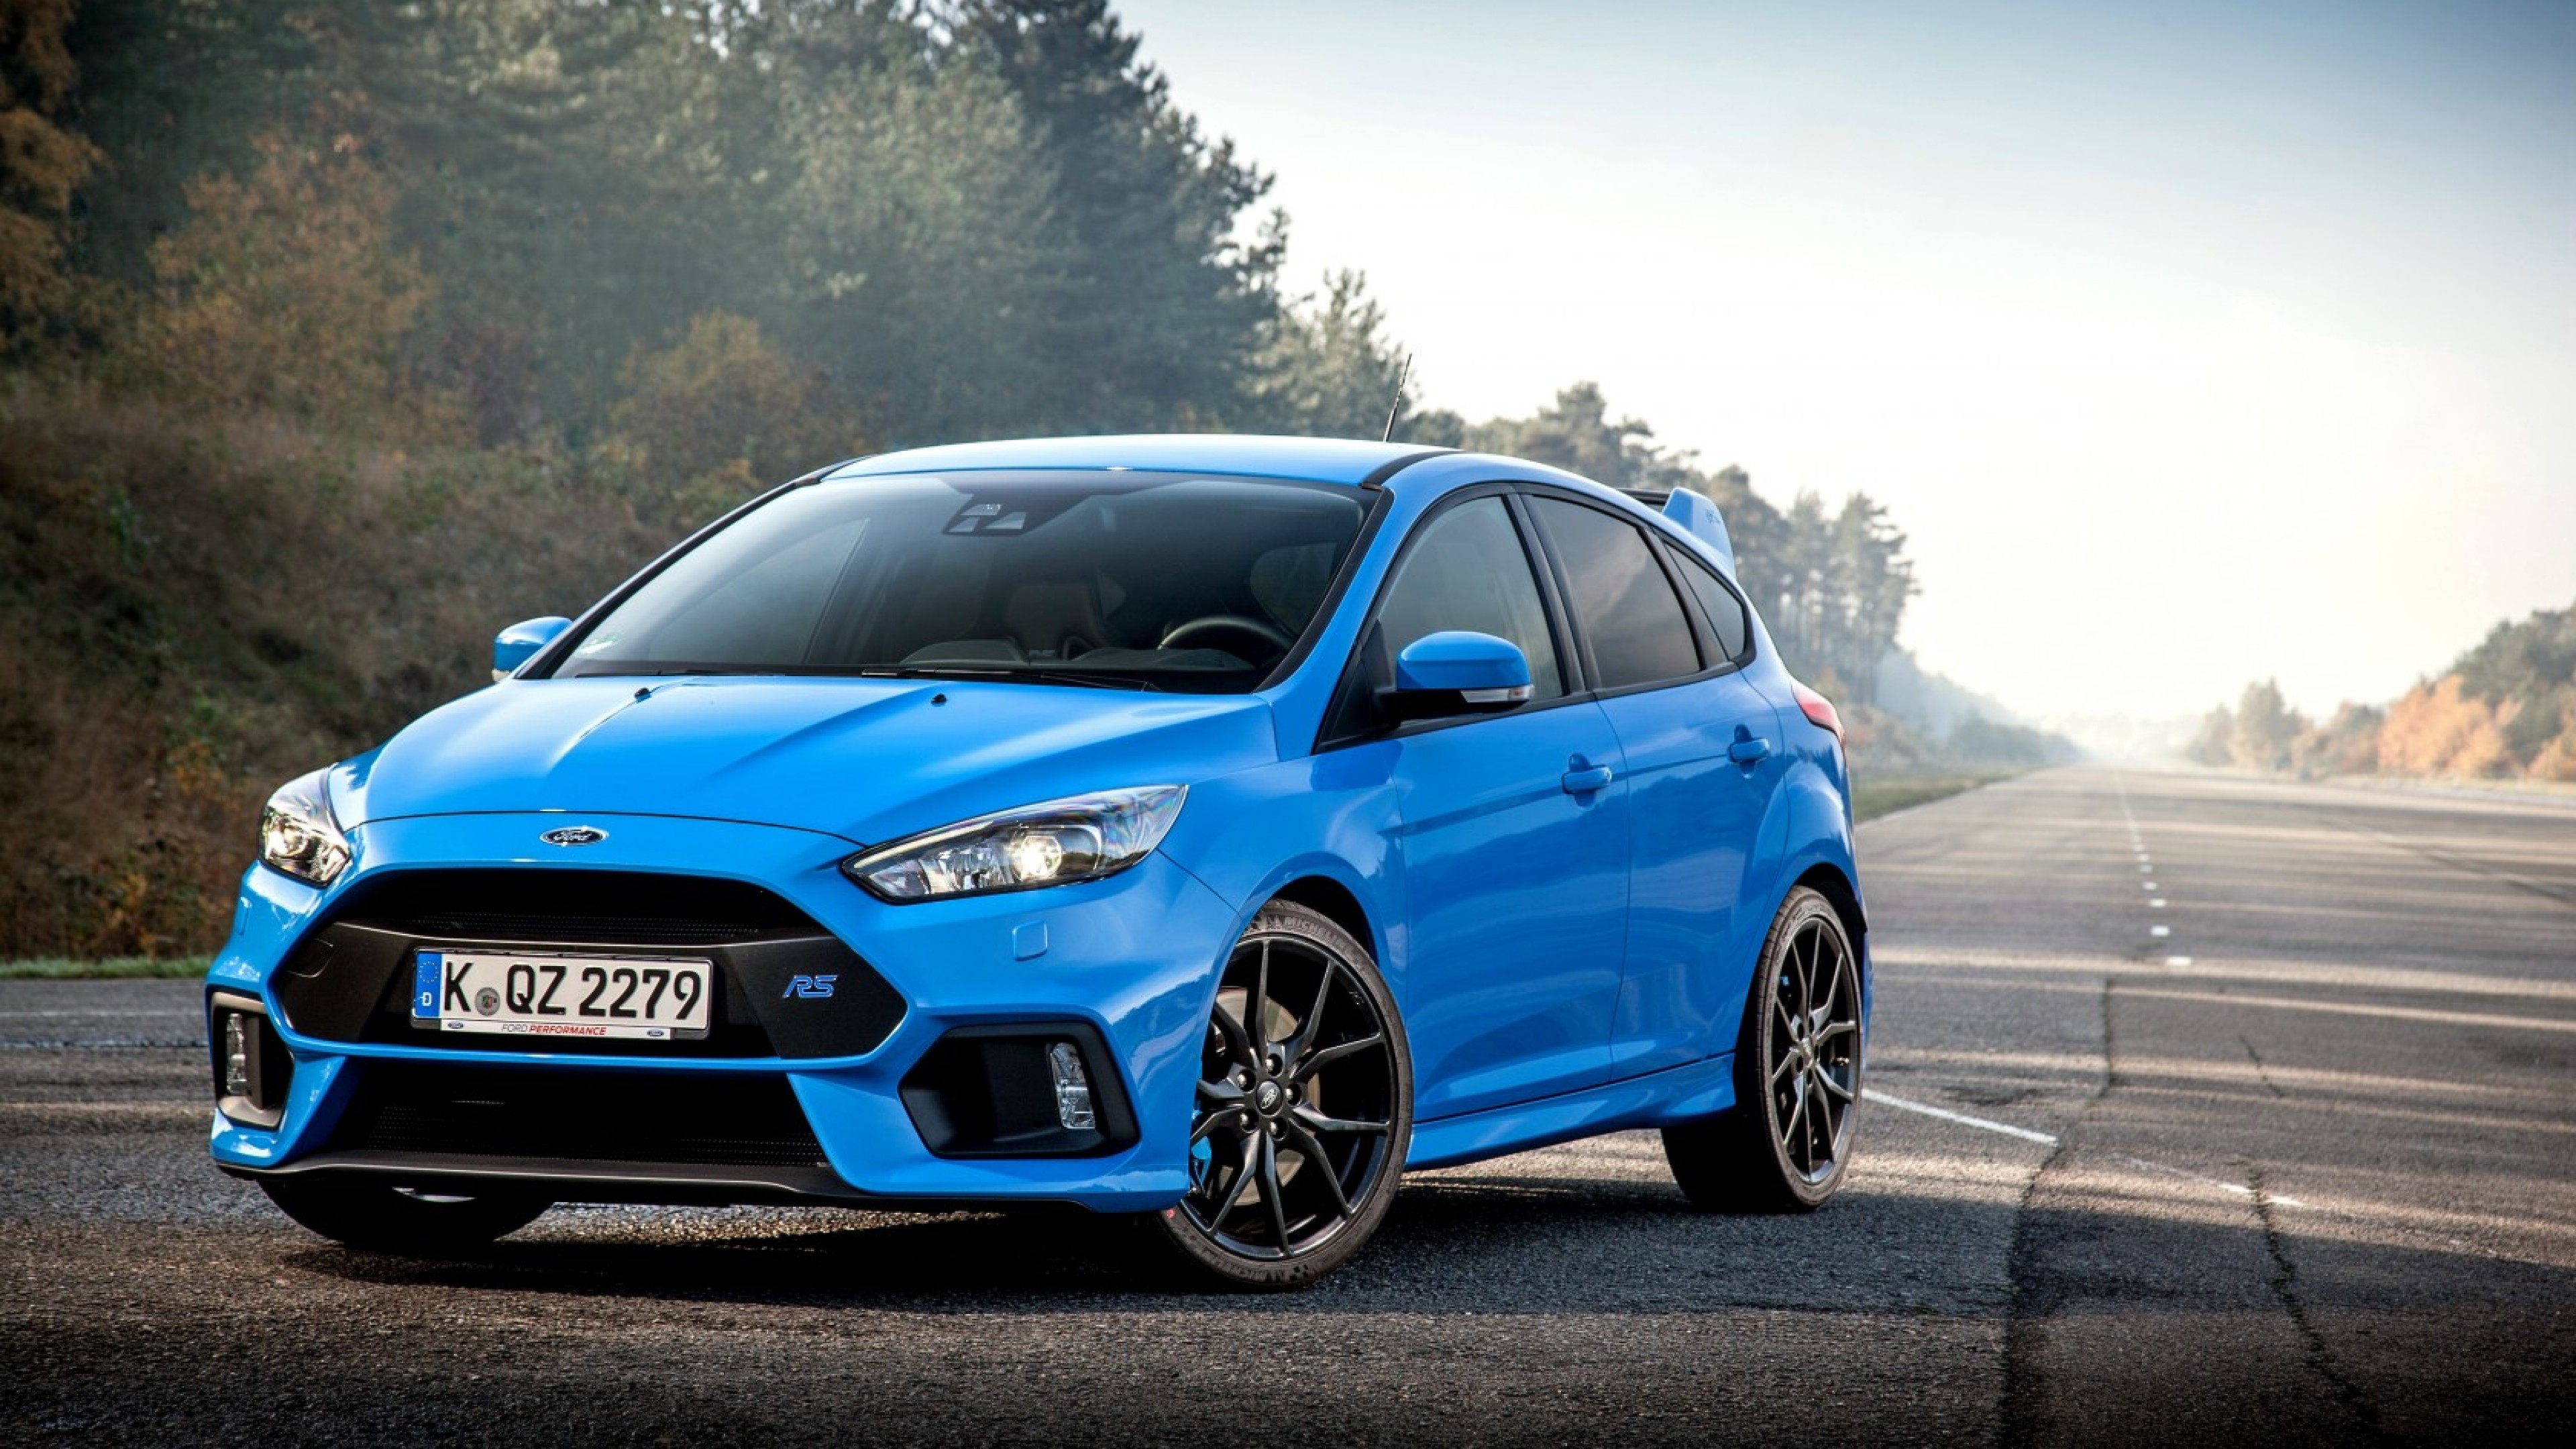 Preview Wallpaper Ford Focus Rs Blue Side View Ford Focus Rs Wallpaper 4k 3840x2160 Wallpaper Teahub Io